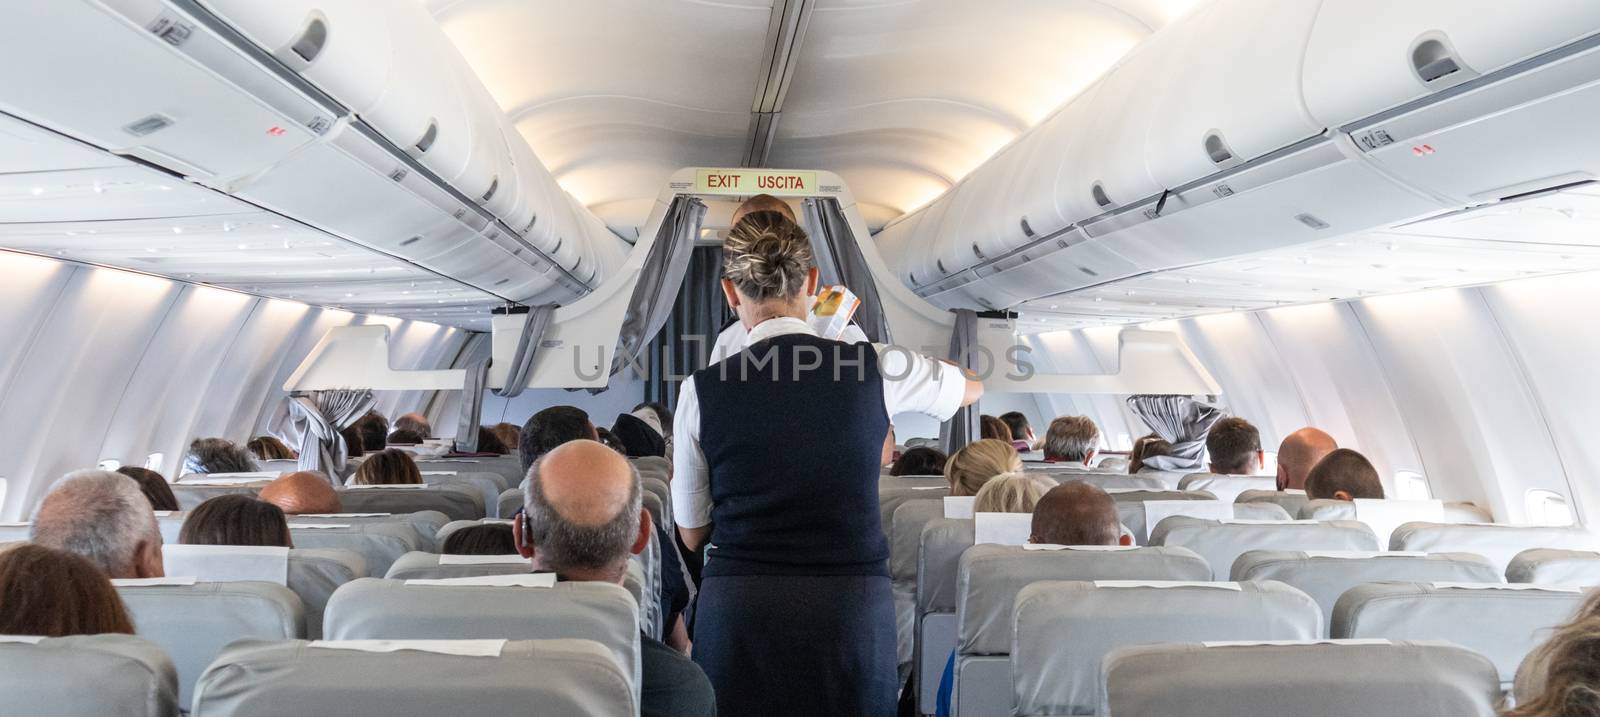 Interior of commercial airplane with stewardess serving passengers on seats during flight. by kasto